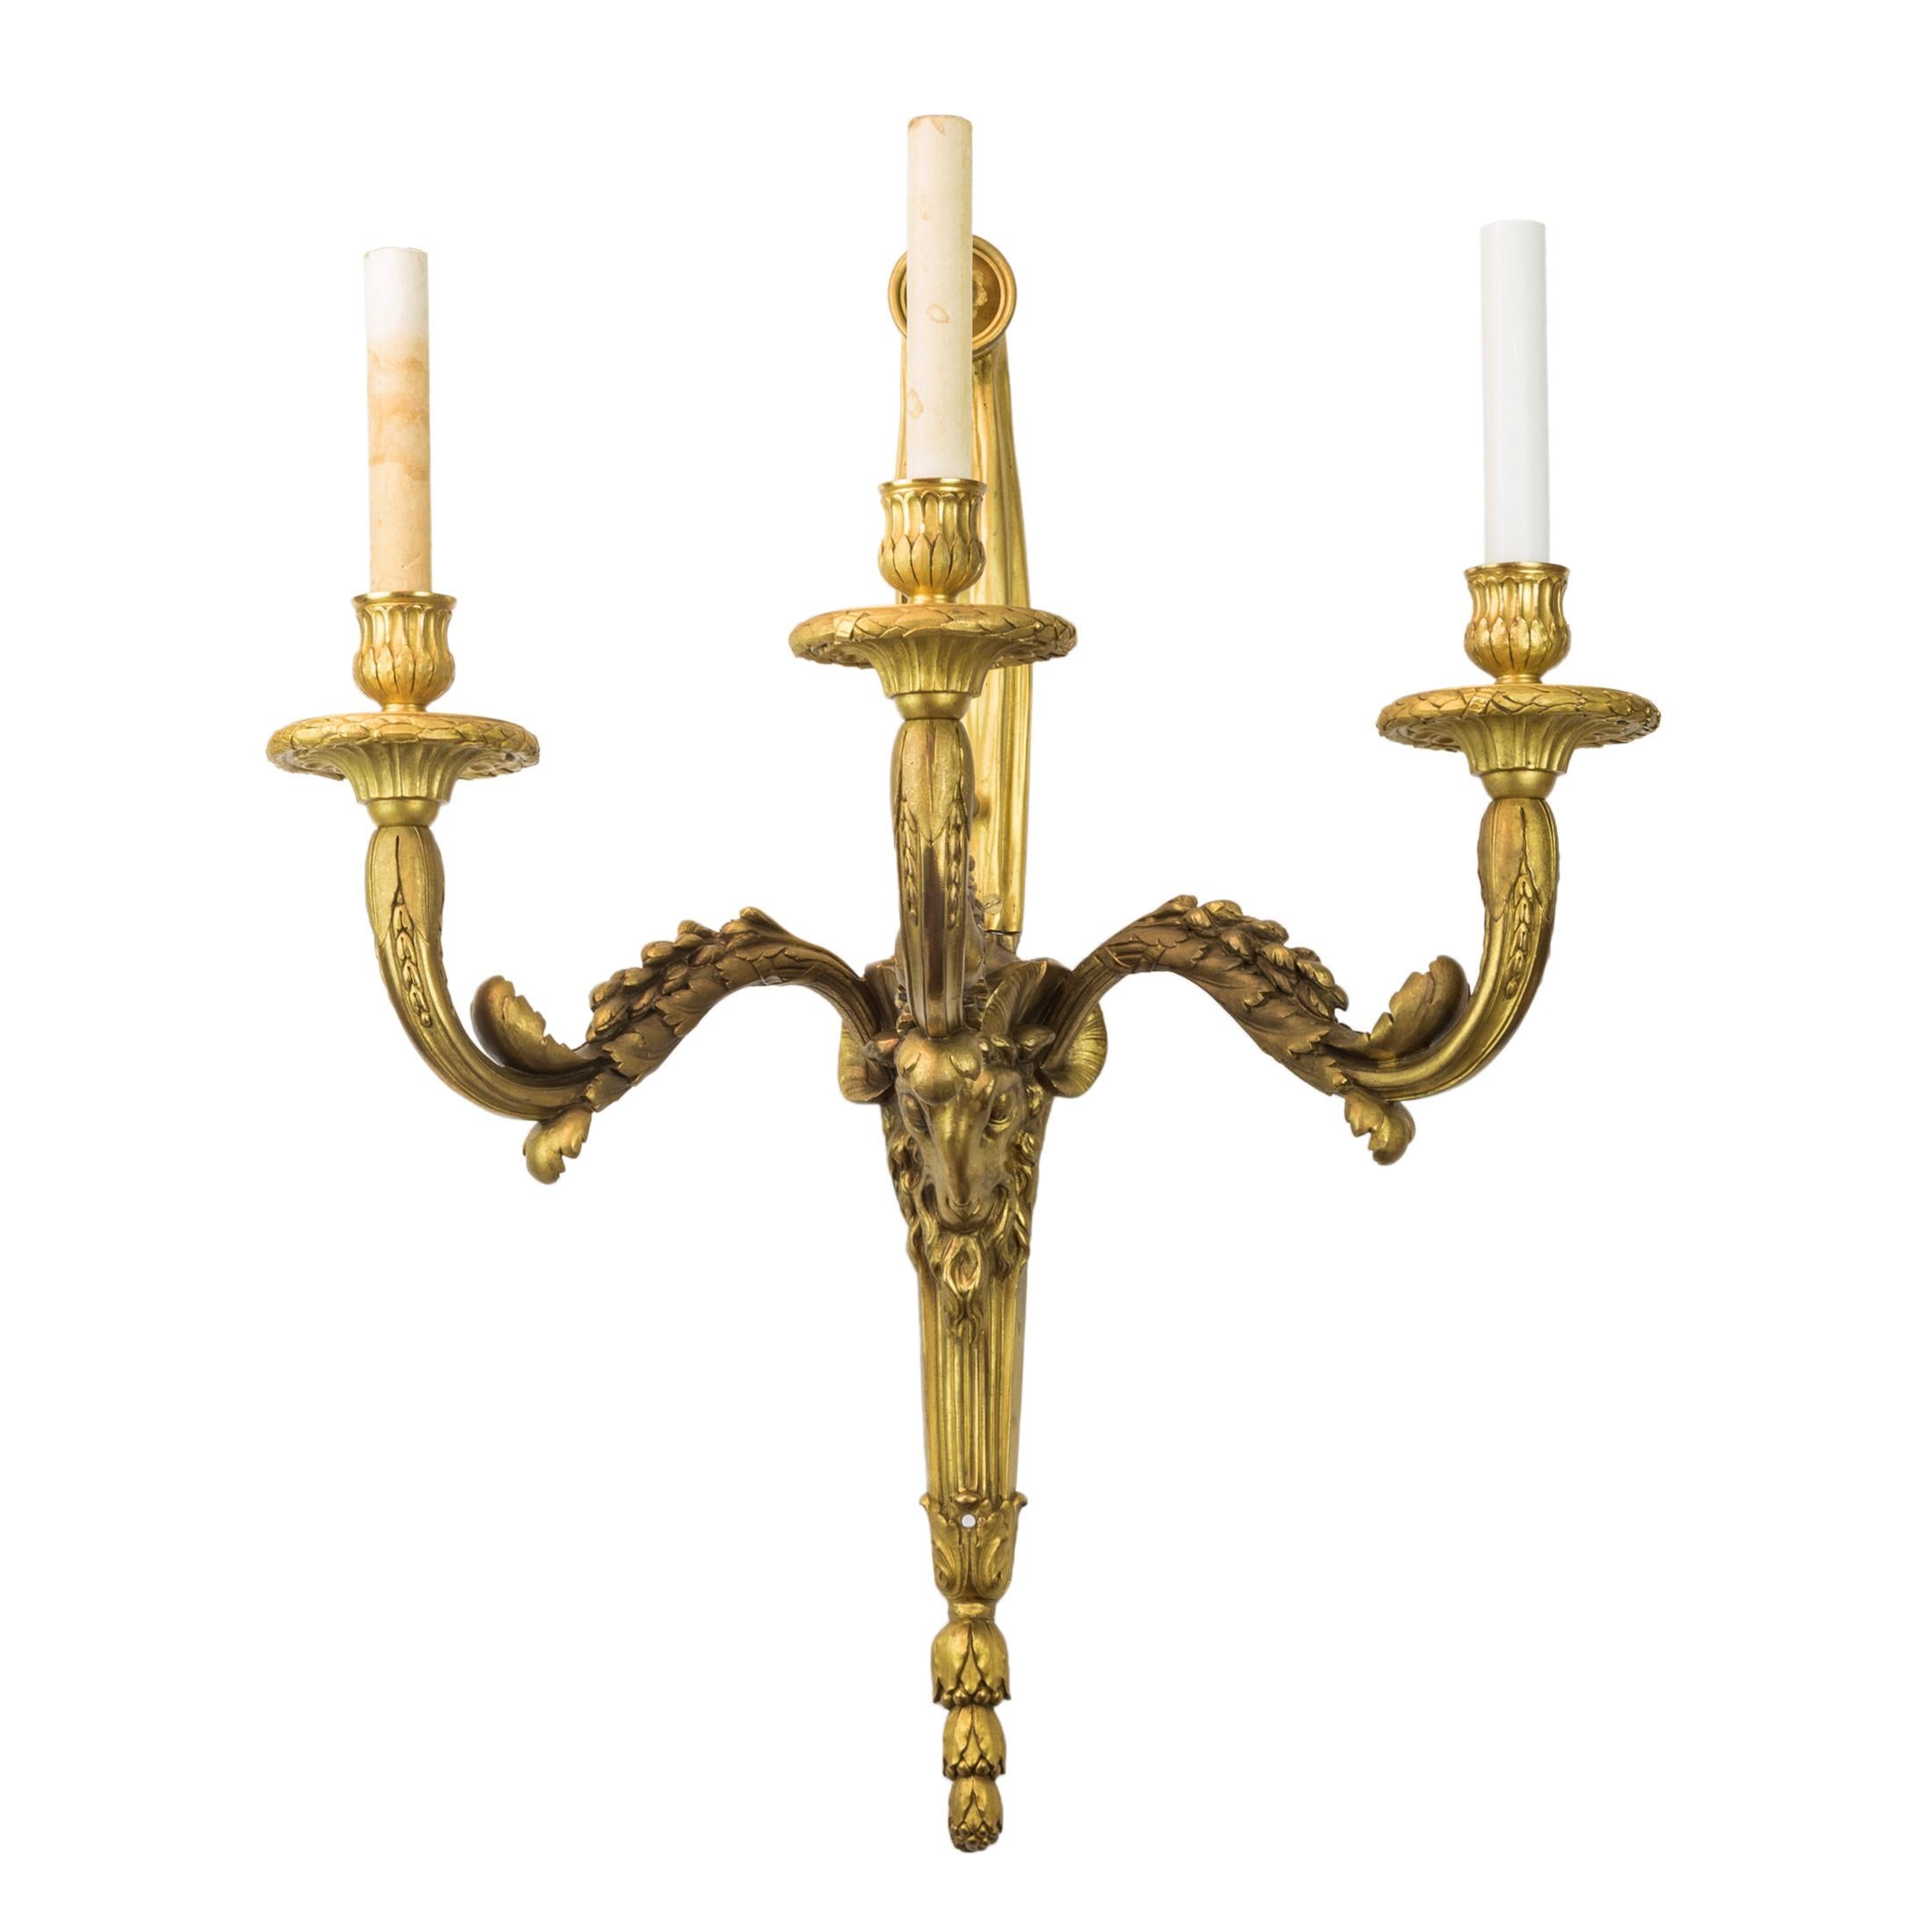 Pair of high quality gilt bronze three-light sconces
each cast with a ram's head mask issuing curved leaf cast candle arms. The ribbon tied backplate hung with finial pinecone.

Origin: French
Date: 19th century
Dimension: 24 in (H) x 19 in (W)